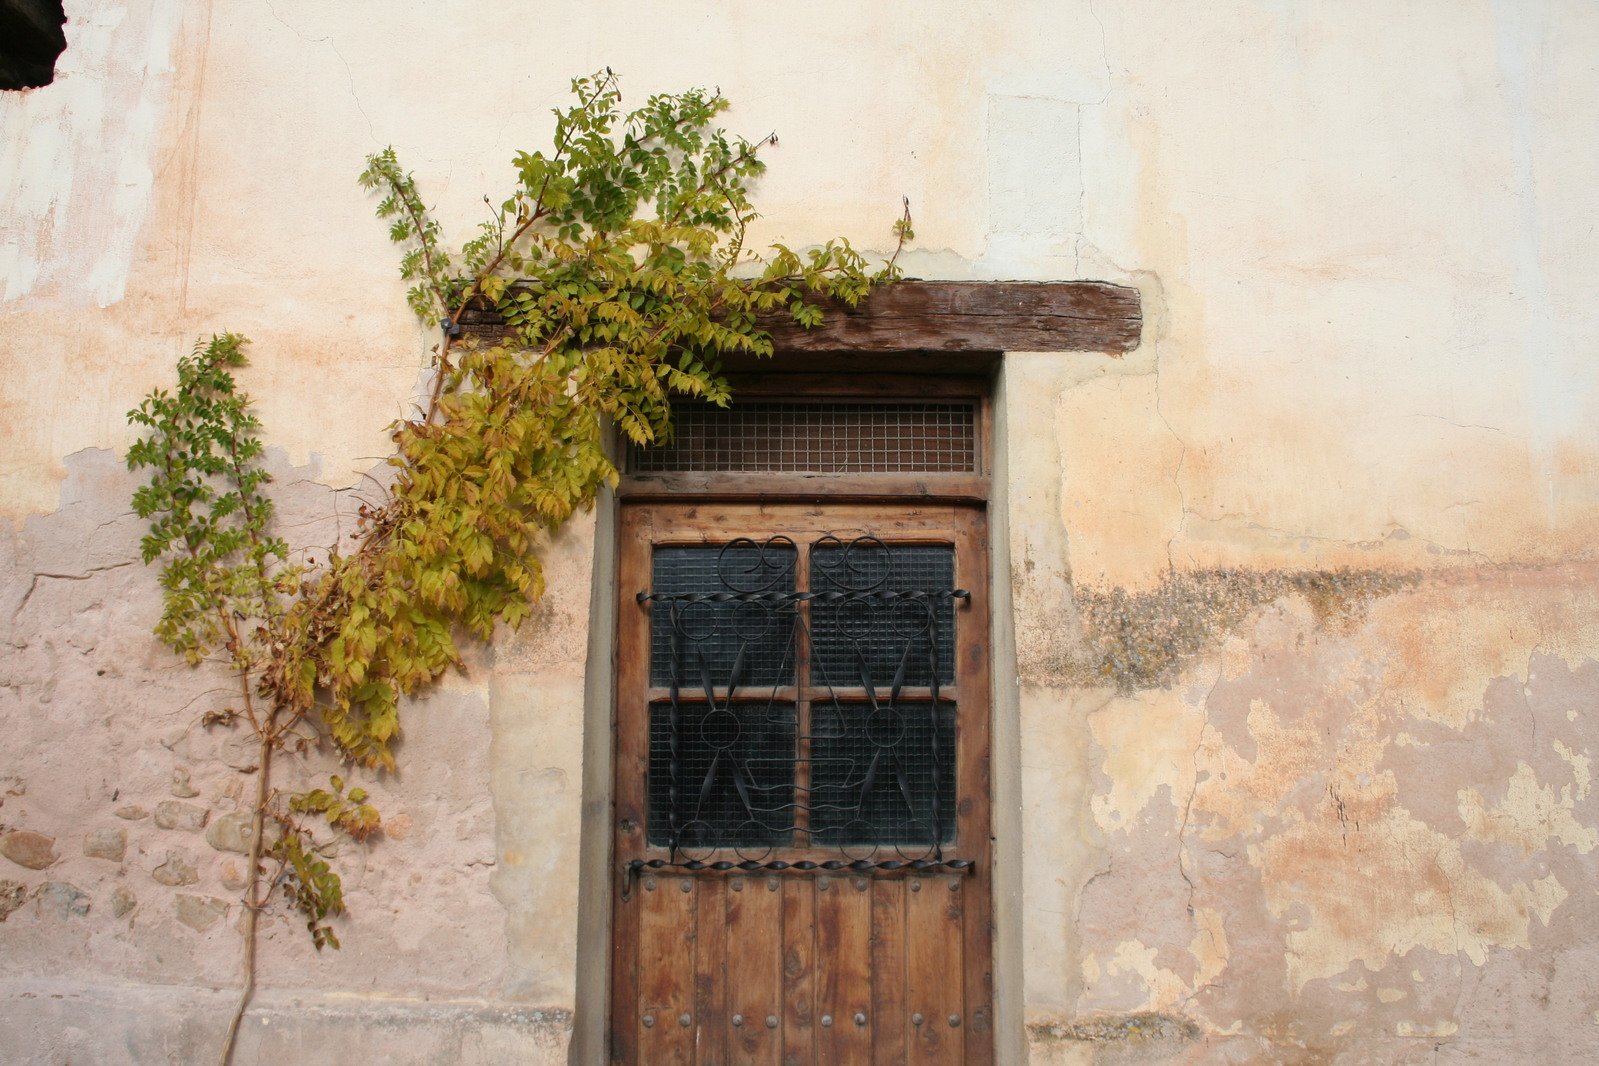 a large wooden door and window sitting outside of a building